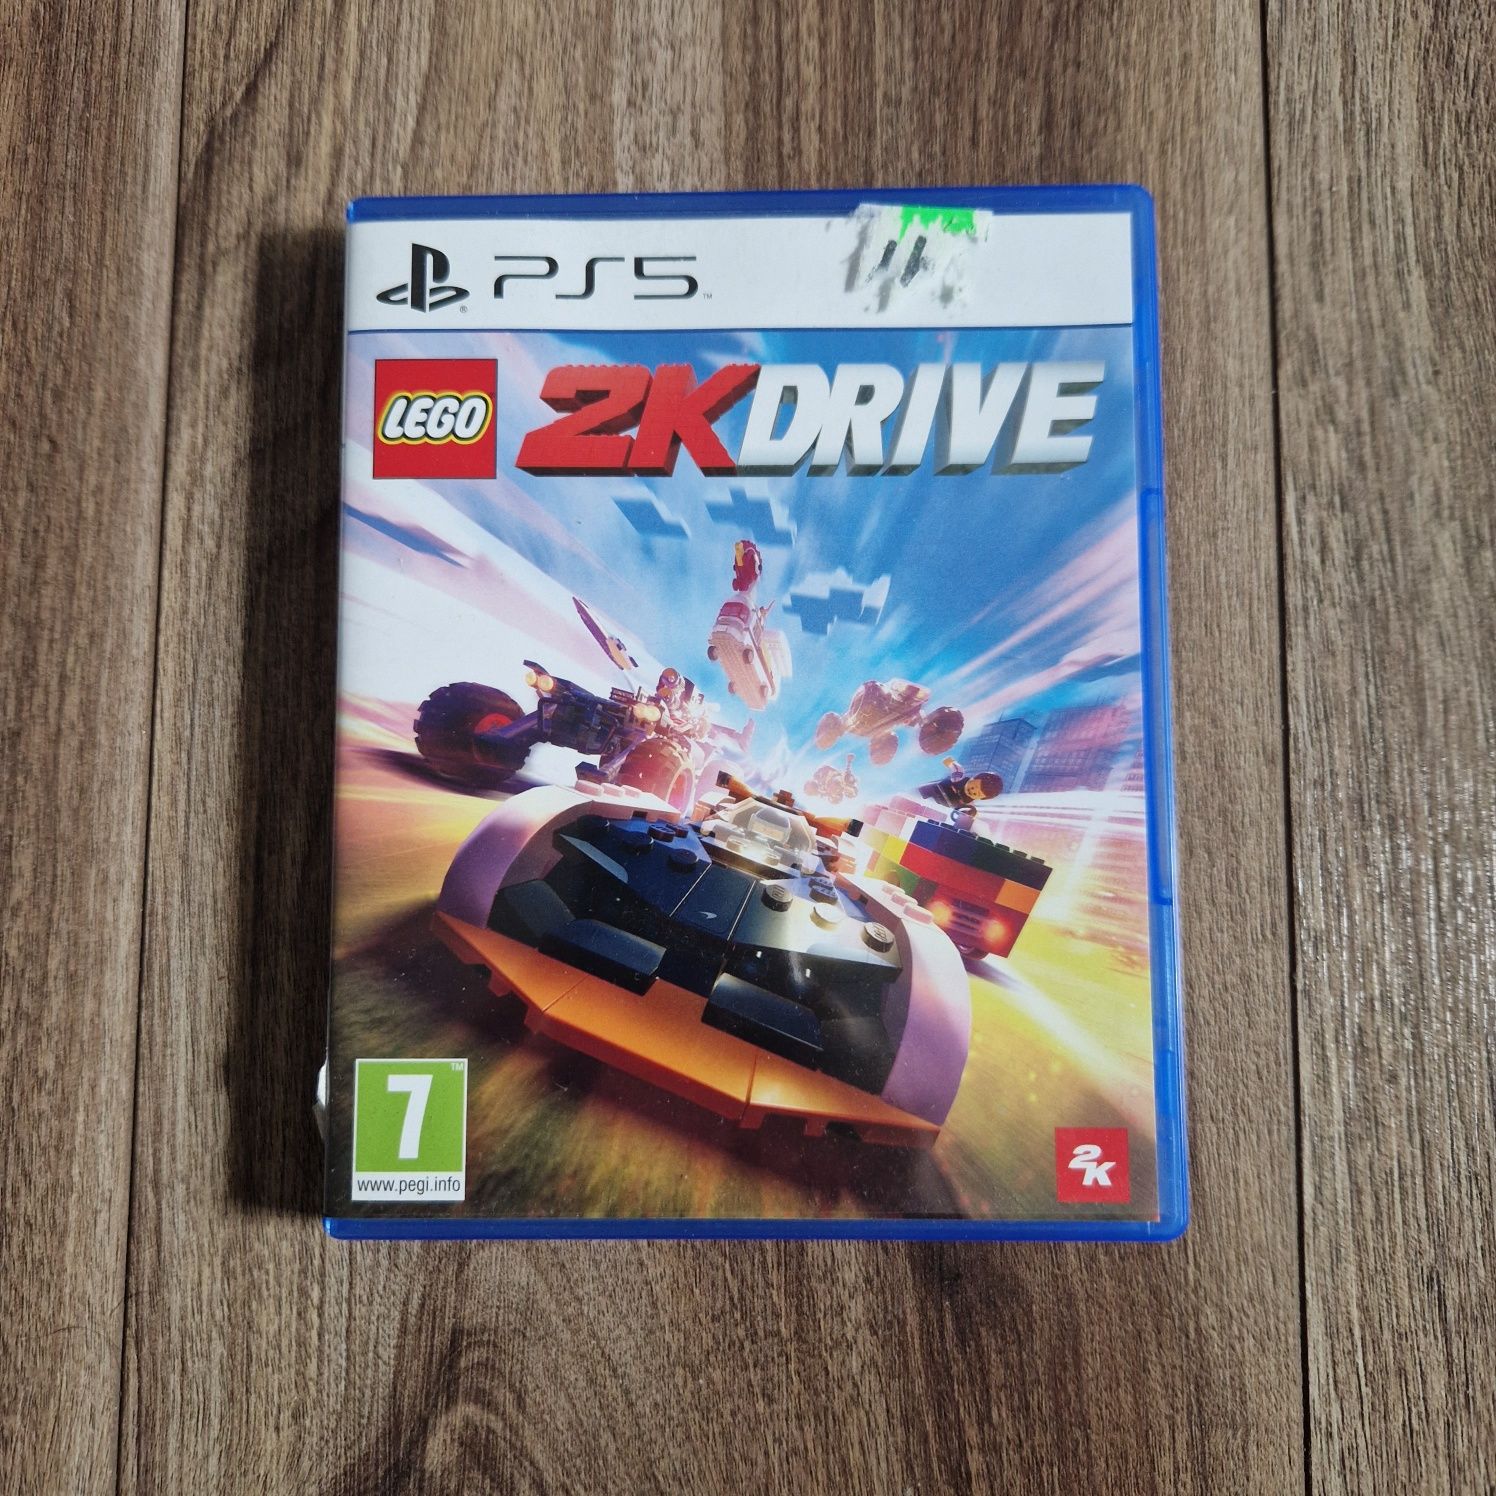 Lego 2K Drive - Ps5